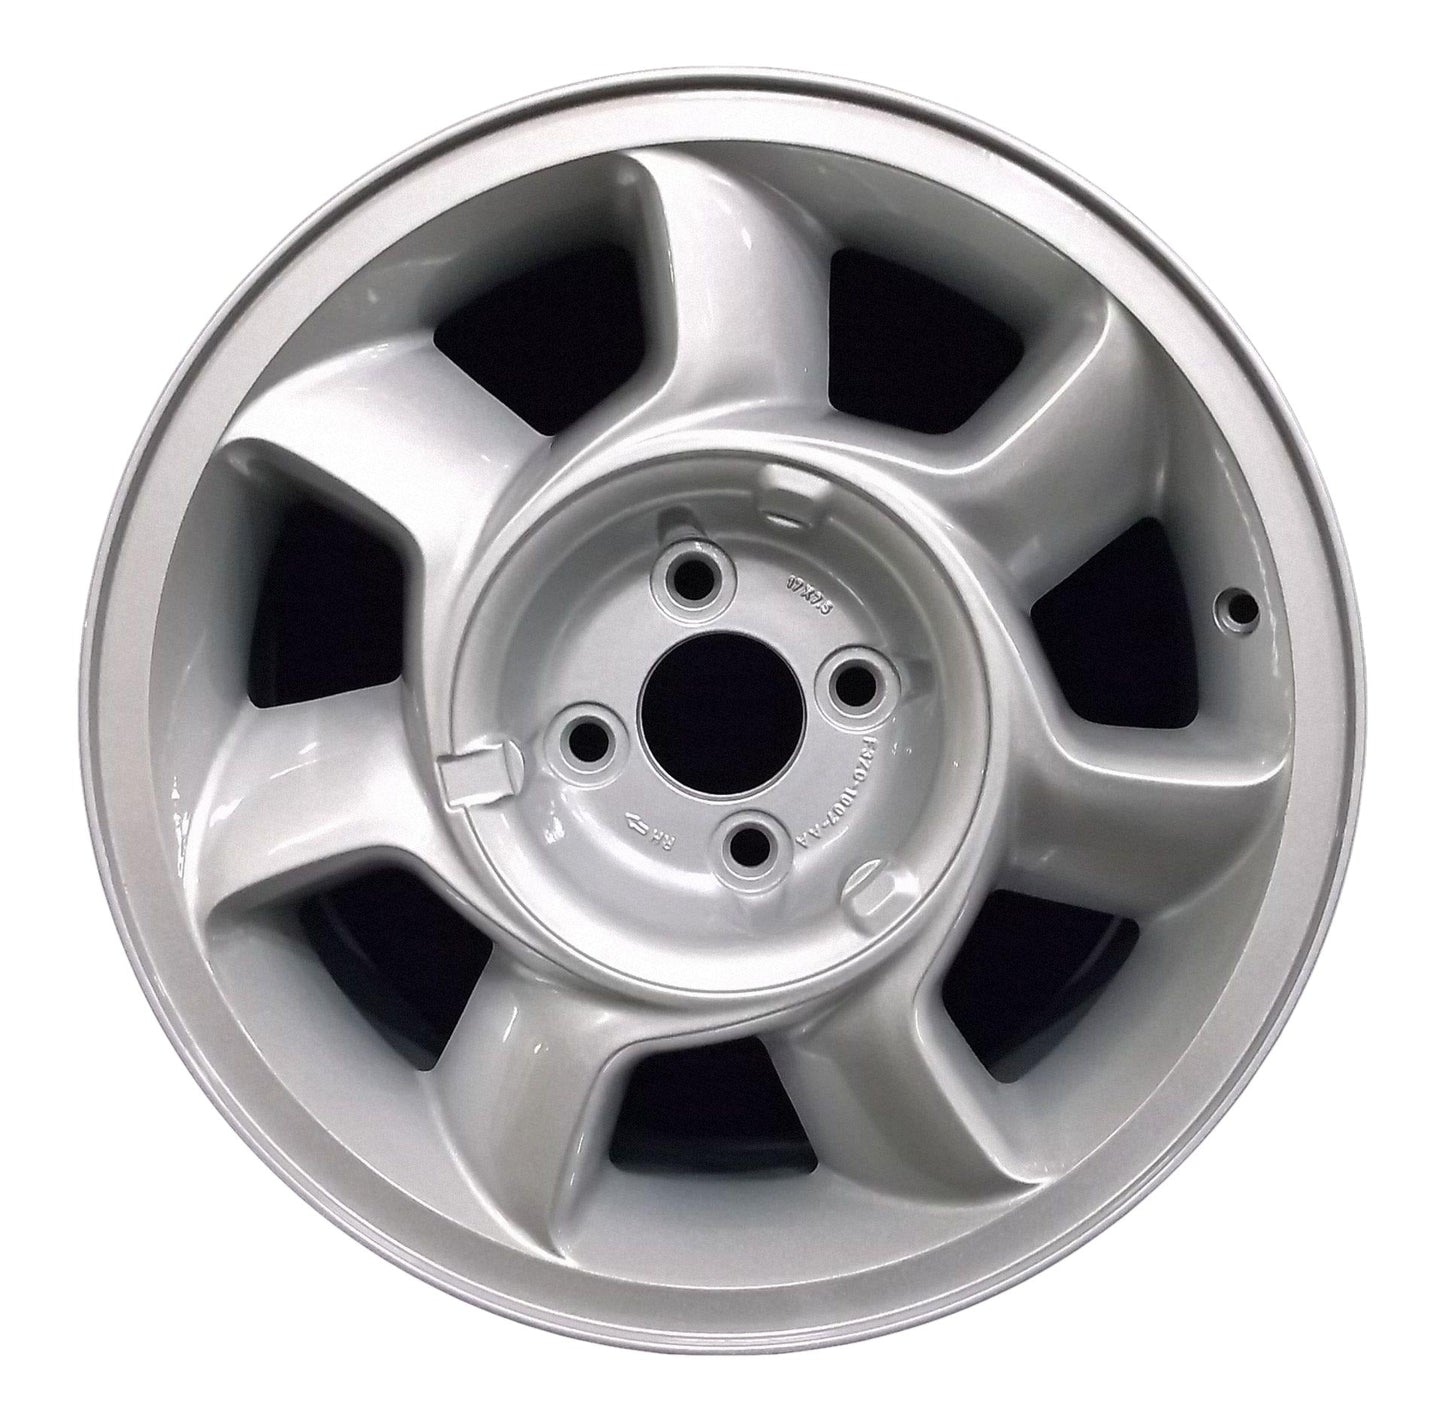 Ford Mustang  1993, 1994 Factory OEM Car Wheel Size 17x7.5 Alloy WAO.3056RT.PS14.FF